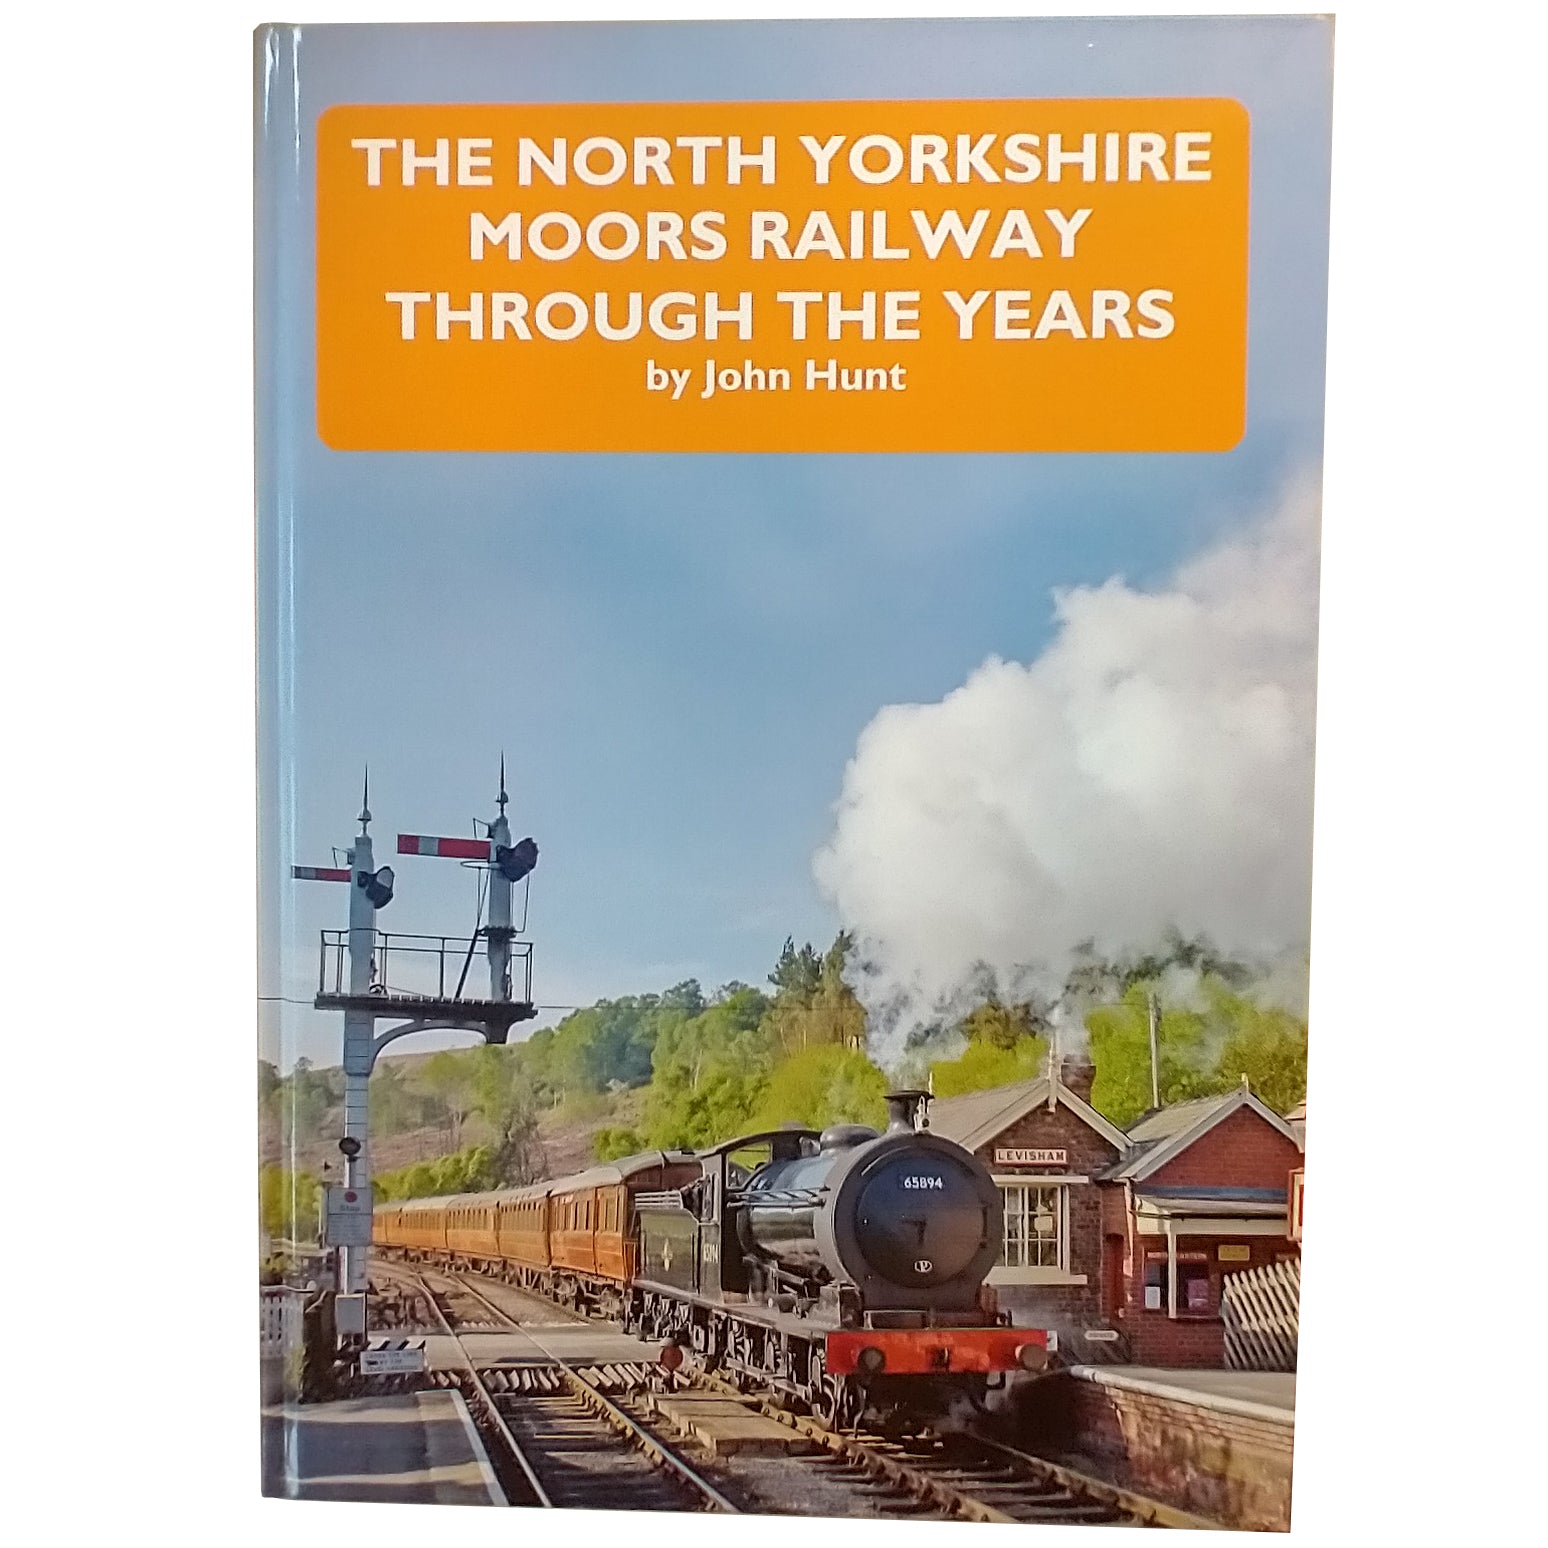 Hard back book cover with photograph of the steam engine 65894 pulling the teak carriages through Levisham Station.  The North Yorkshire Moors Railway Through the Years by John Hunt printed in white on a yellow block at the top of the picture.